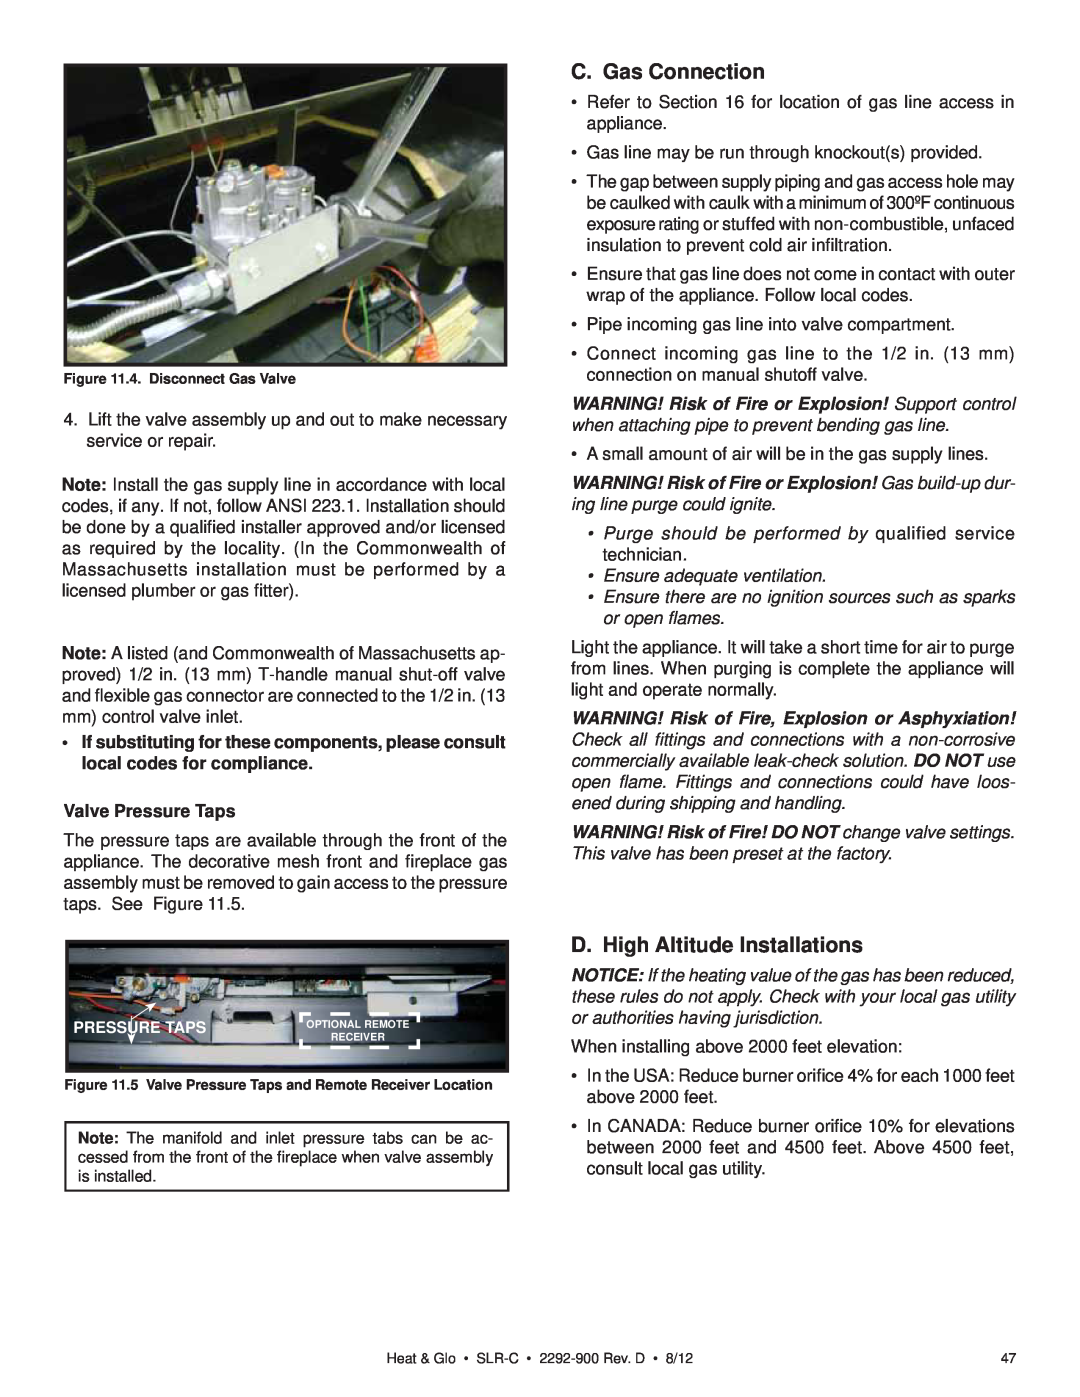 Heat & Glo LifeStyle SLR-C (COSMO) owner manual C. Gas Connection, D. High Altitude Installations, Valve Pressure Taps 